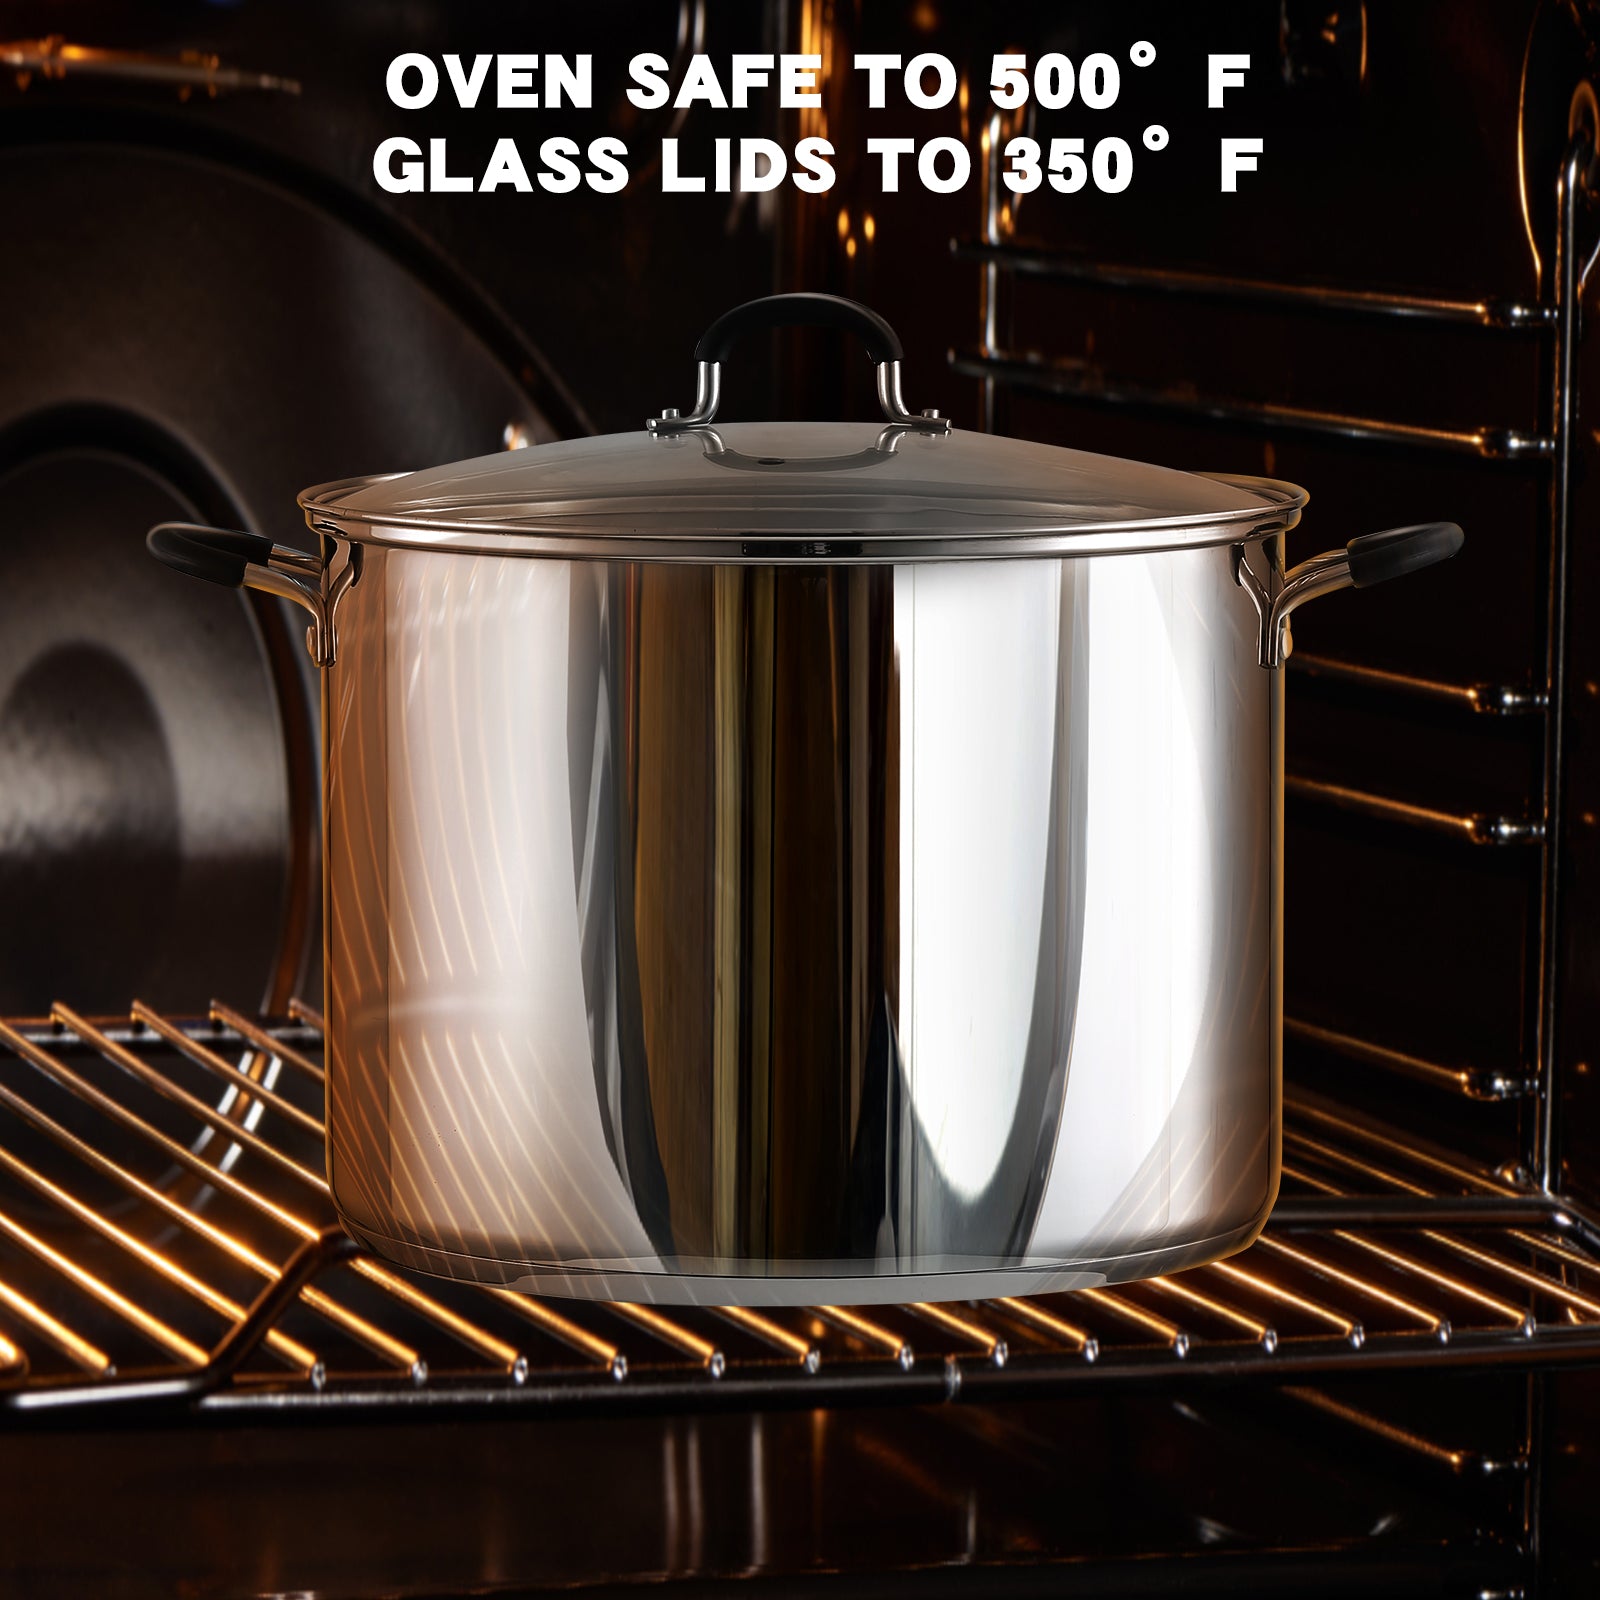 Cook N Home 8 qt. Stainless Steel Stock Pot in Black and Stainless